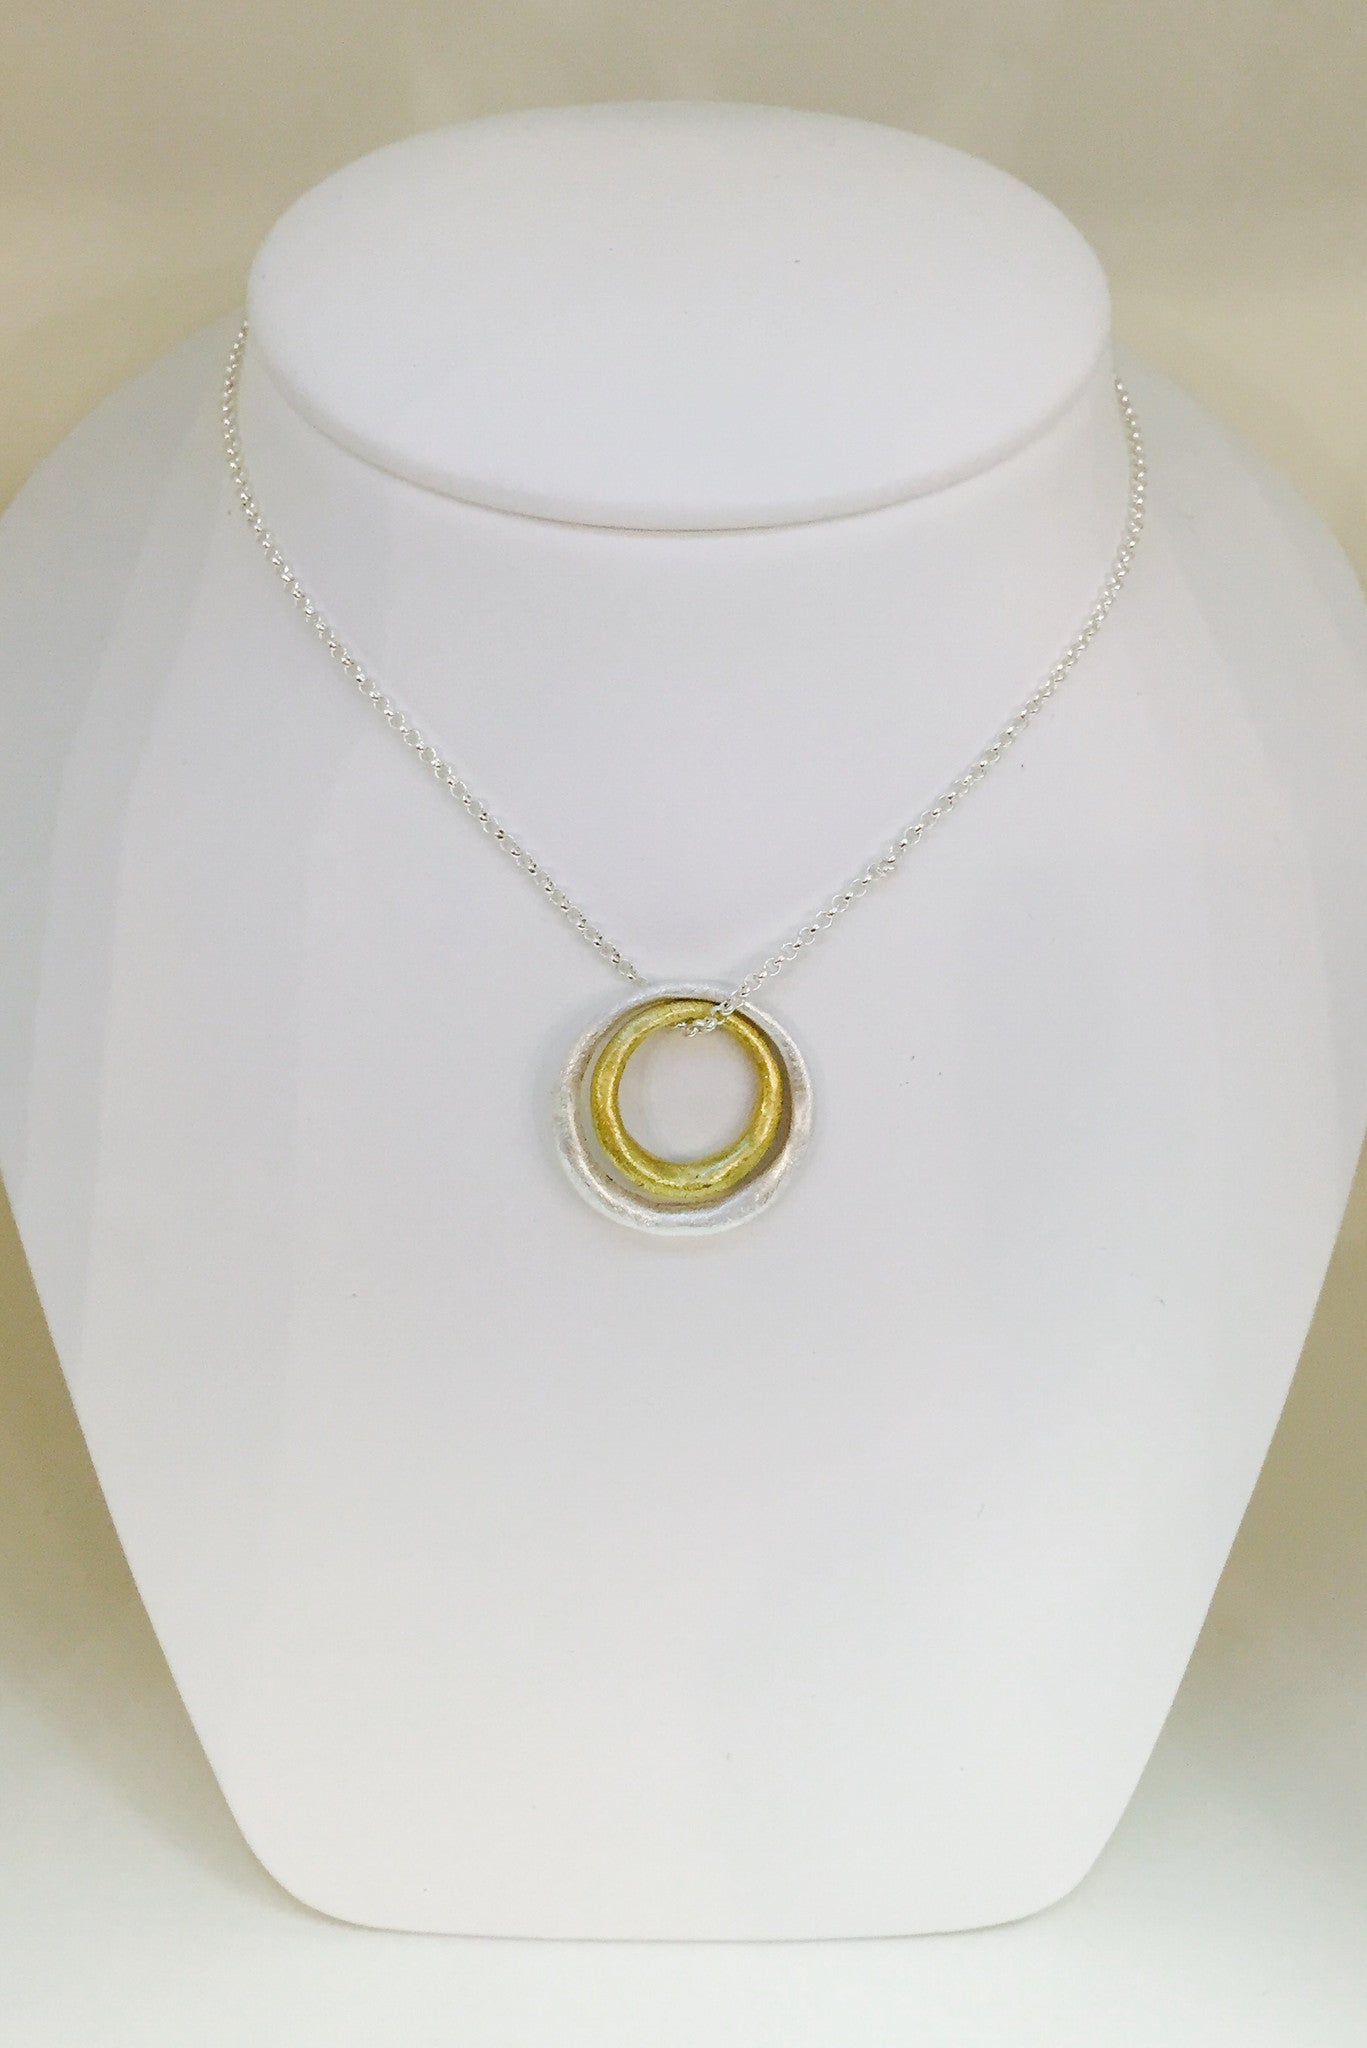 15"-18" Two Tone Circle Necklace (Silver and Gold tones)